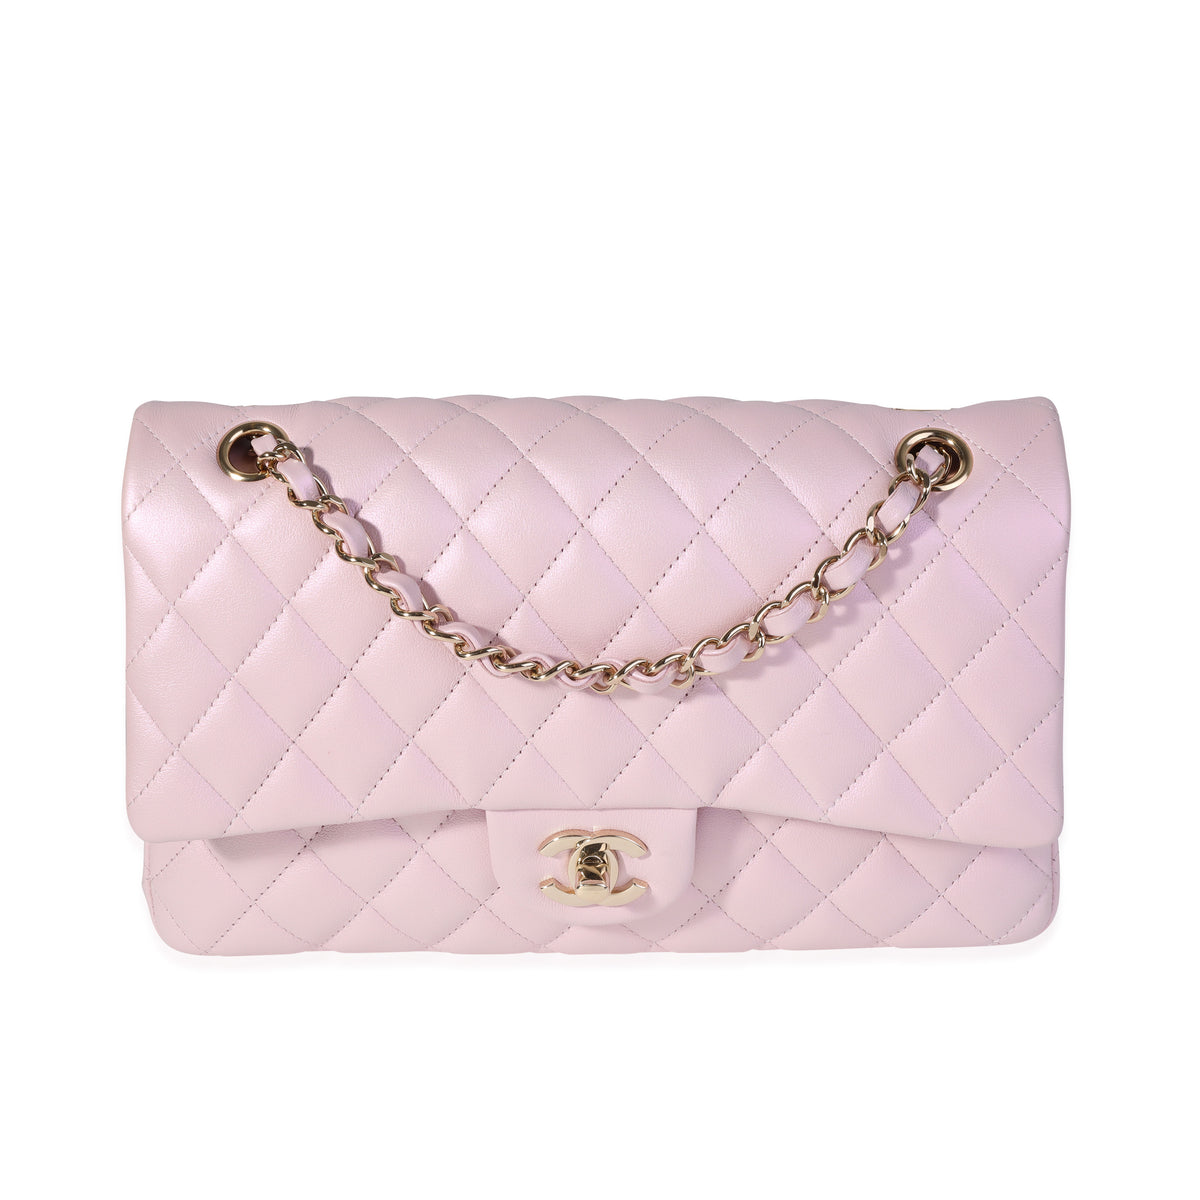 pink chanel quilted handbag